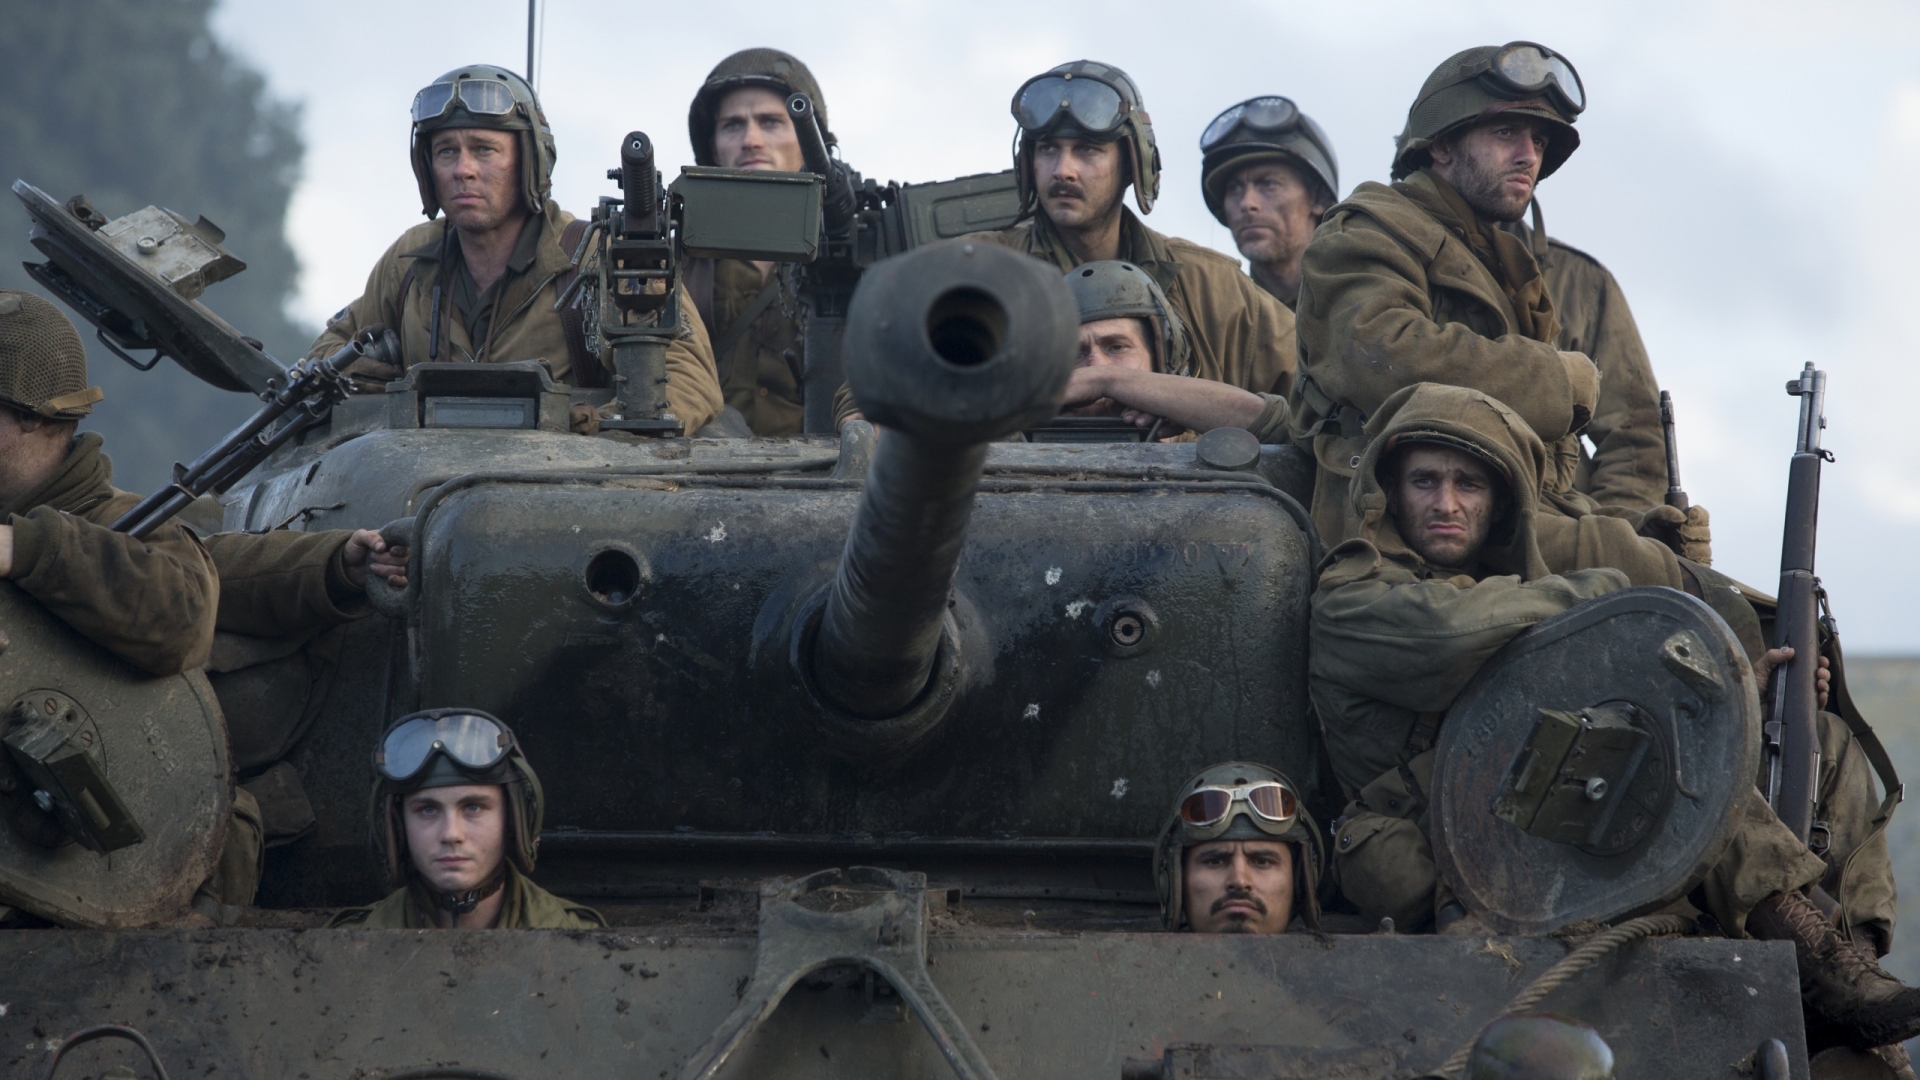 Fury Movie 2014 for 1920 x 1080 HDTV 1080p resolution